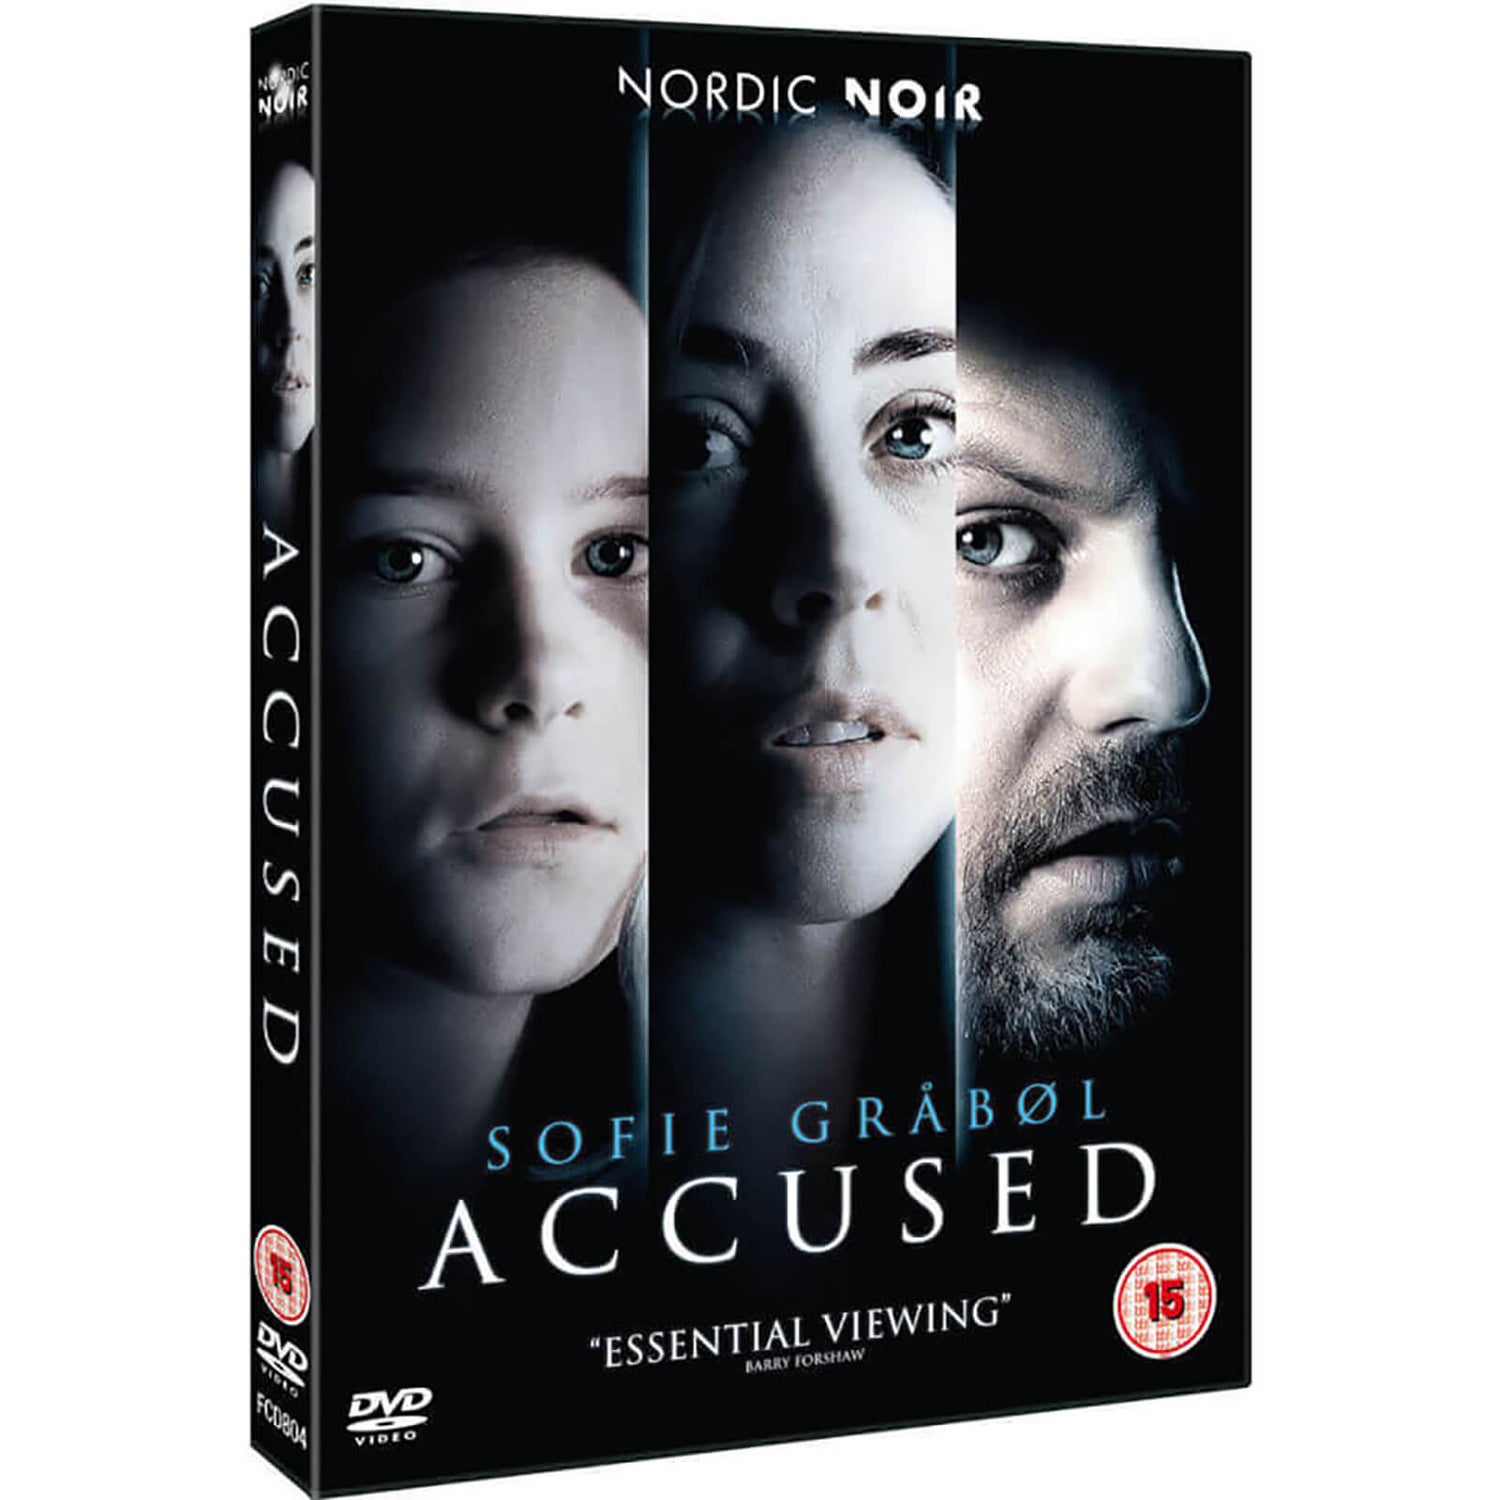 The Accused DVD